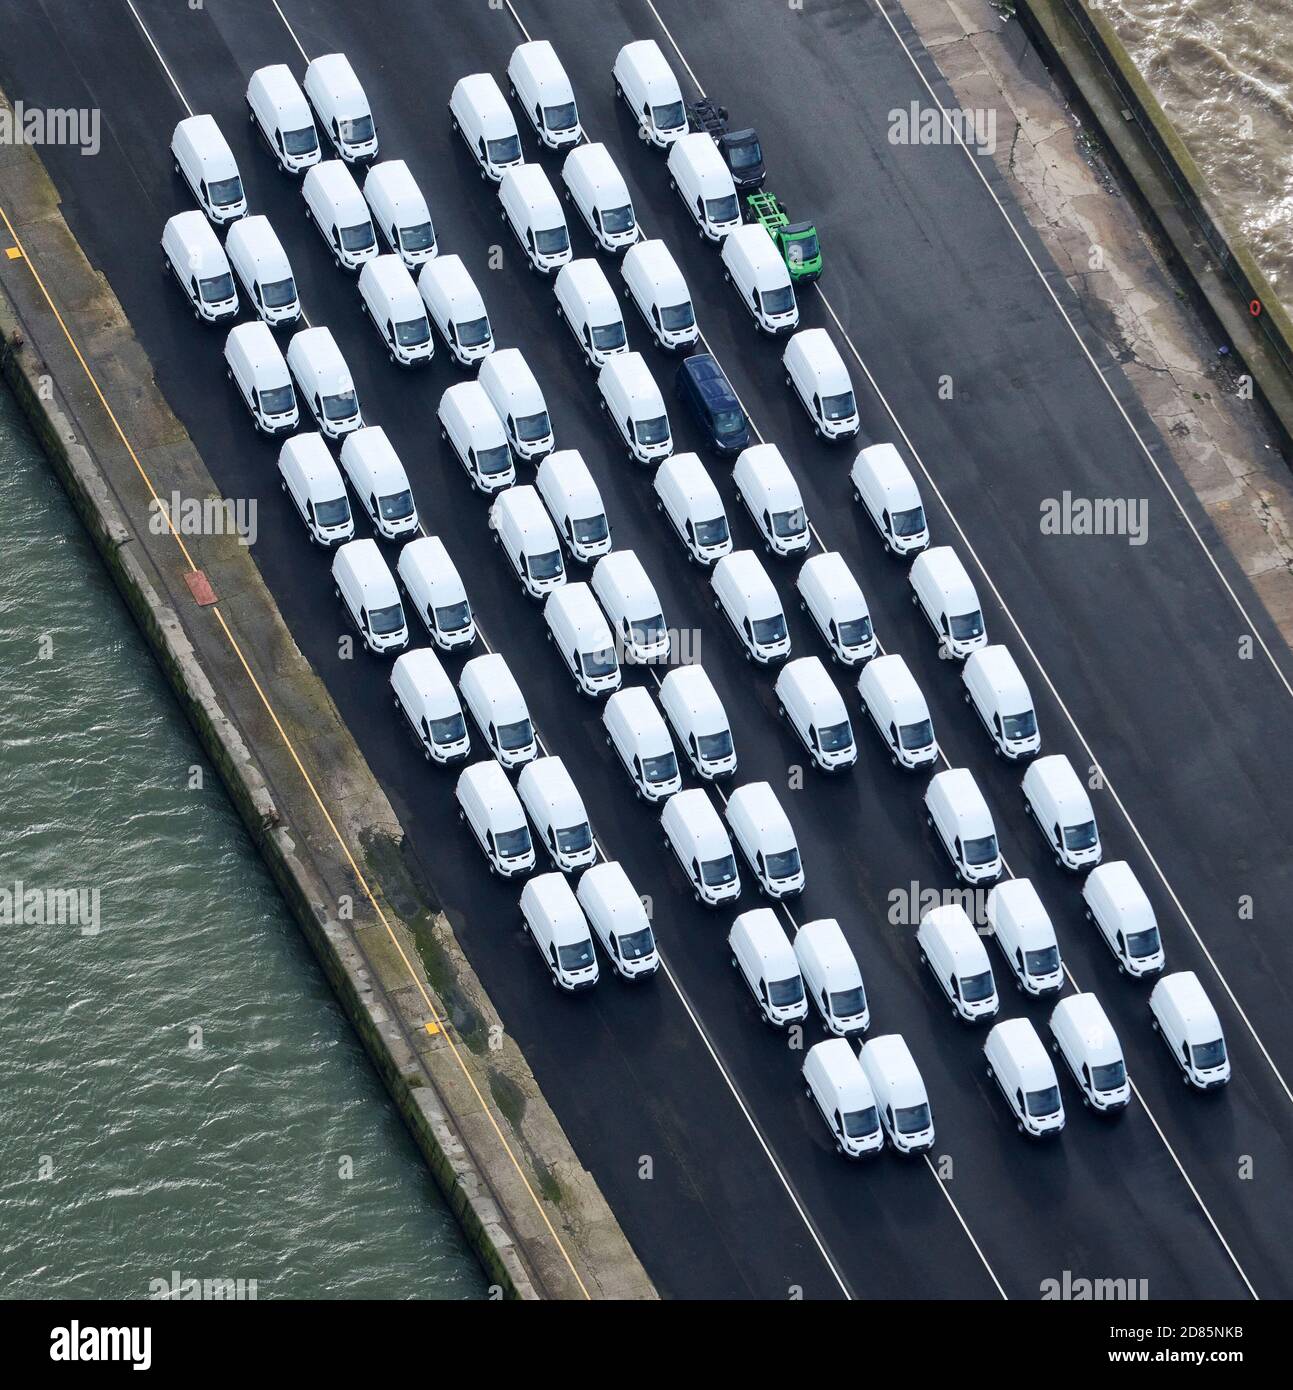 A line up of Ford Transit vans at Seaforth docks Liverpool Merseyside, North West England, UK Stock Photo